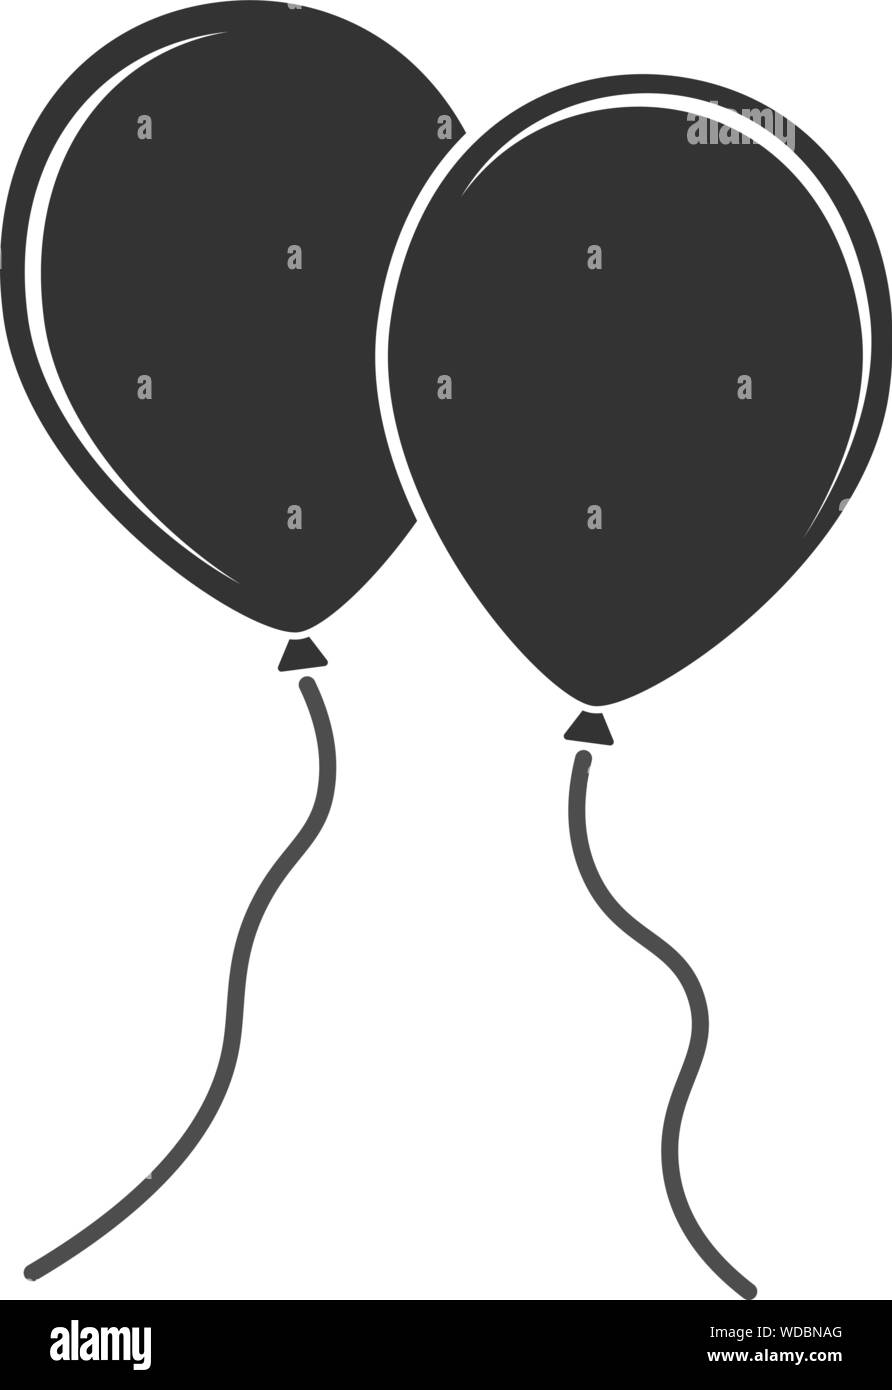 simple flat black and white balloon icon vector illustration Stock Vector